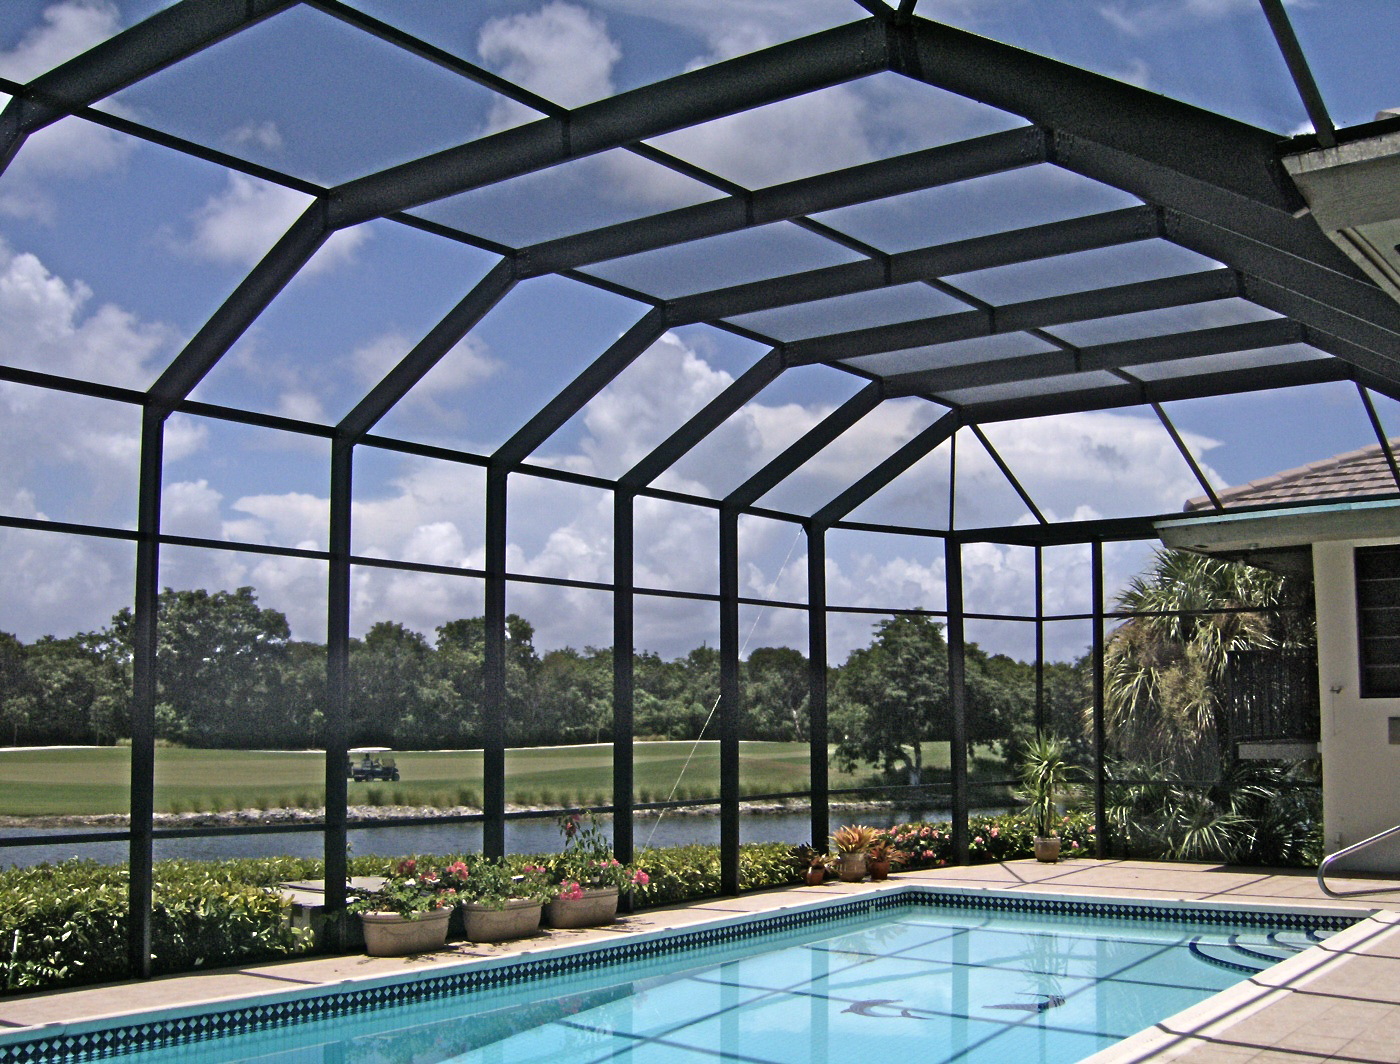 A screened pool enclosure from Venetian Builders, Inc., Miami. Screens protect from insects, other pests and even errant golf balls but preserve views, ventilation and sunlight.